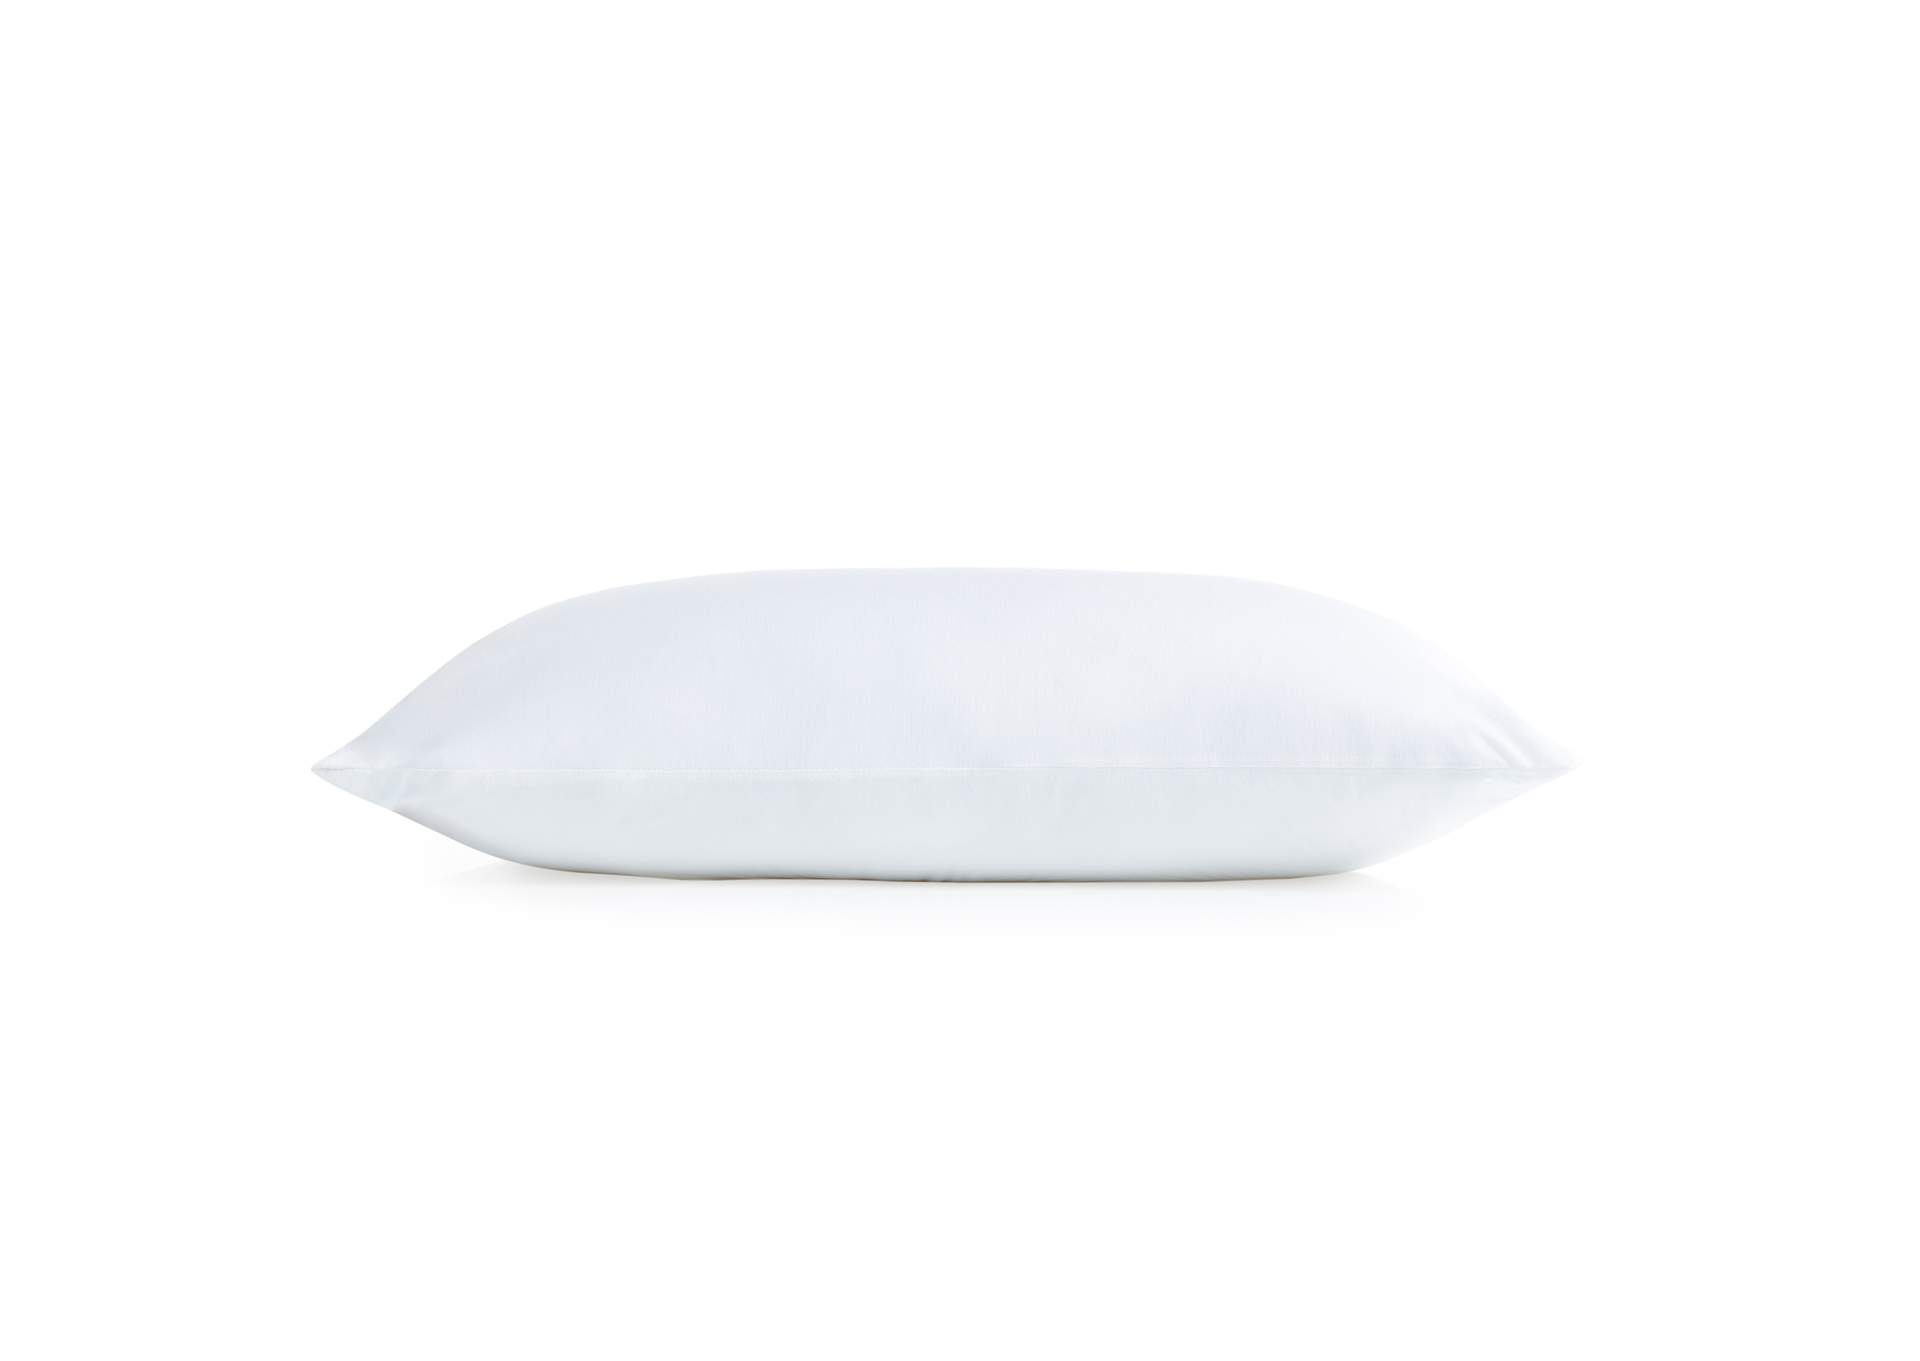 Malouf Five 5ided Omniphase Pillow Protector - Queen Size,Malouf